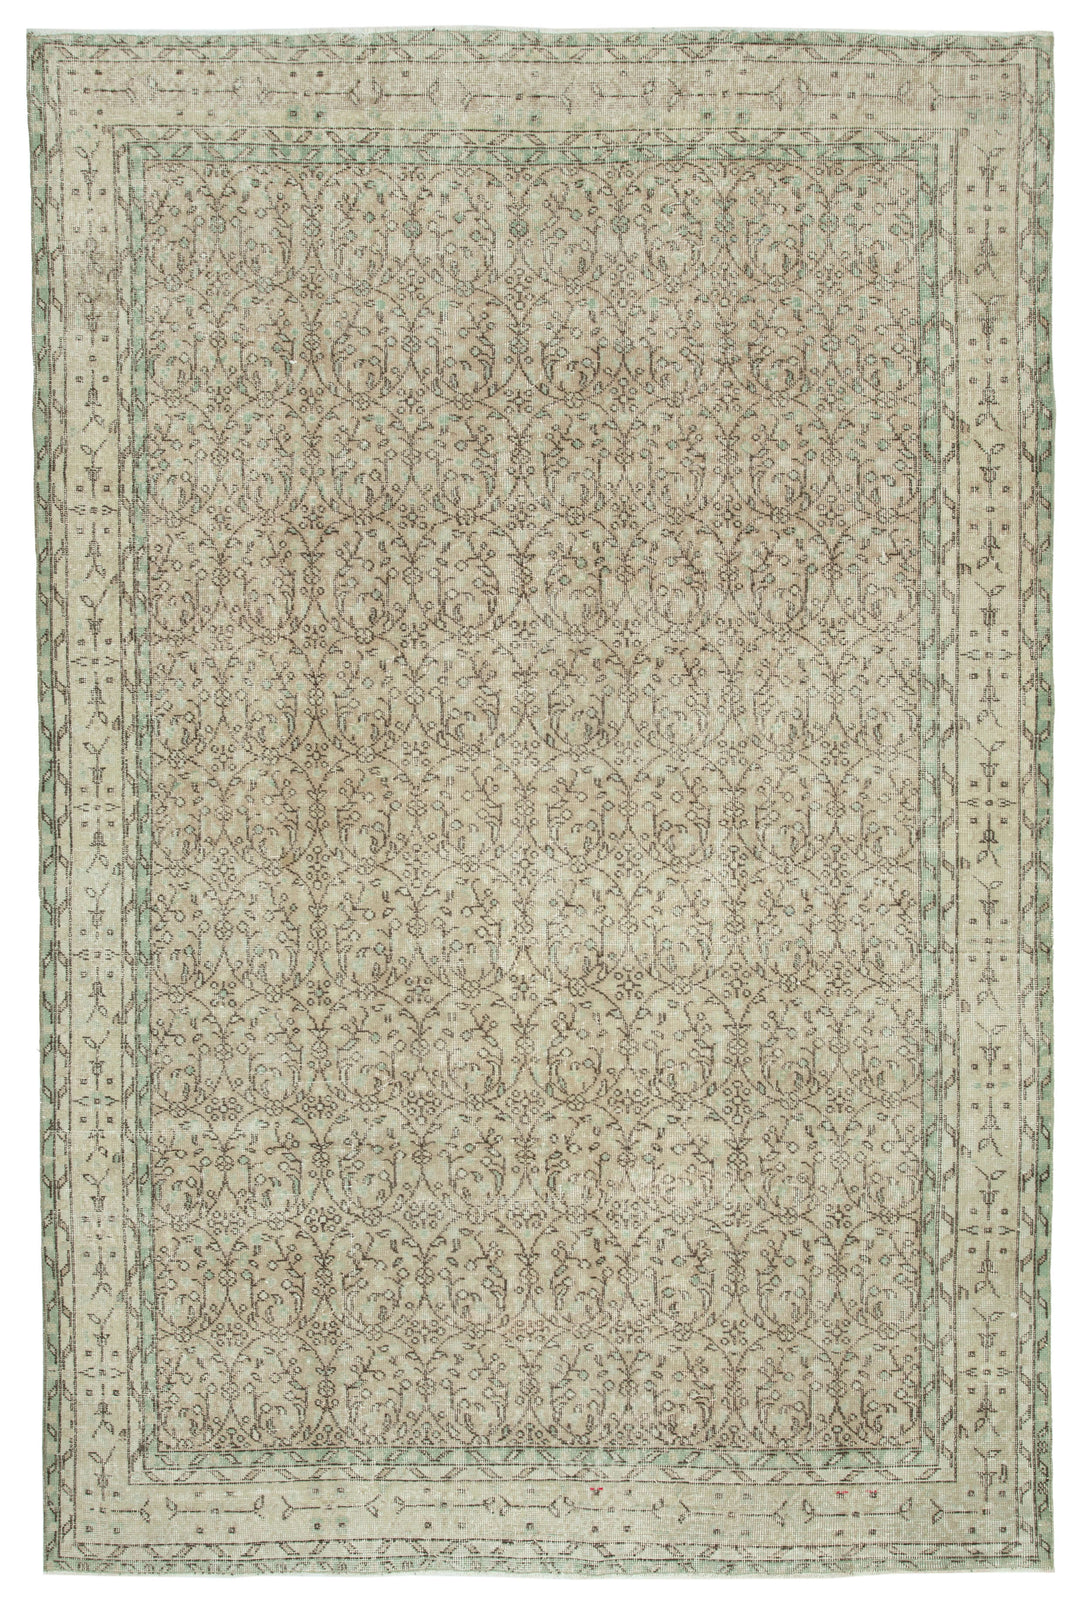 Handmade White Wash Area Rug > Design# OL-AC-25075 > Size: 6'-6" x 10'-1", Carpet Culture Rugs, Handmade Rugs, NYC Rugs, New Rugs, Shop Rugs, Rug Store, Outlet Rugs, SoHo Rugs, Rugs in USA